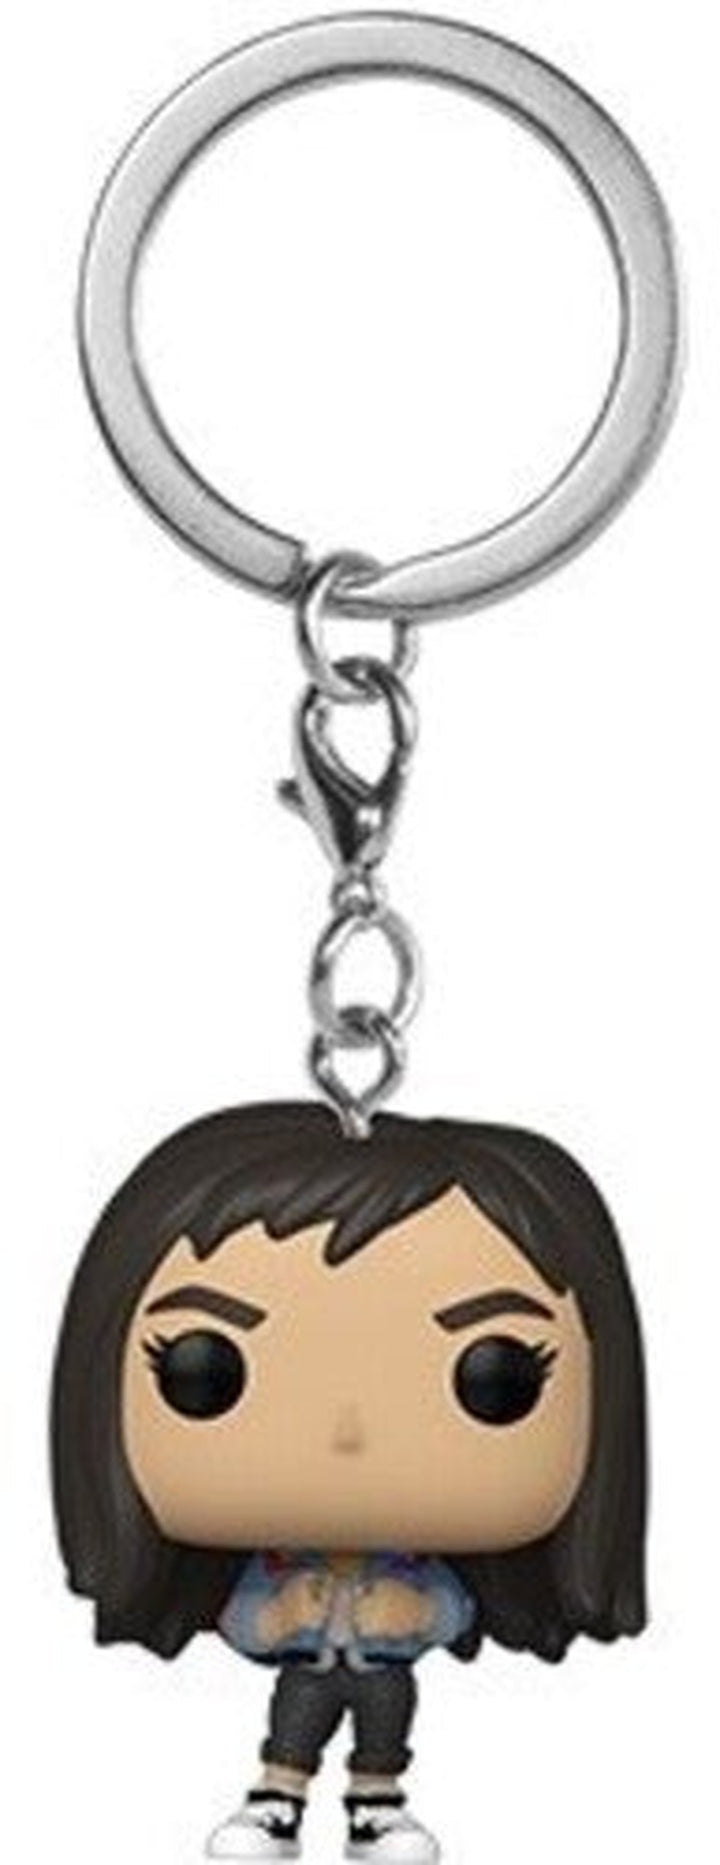 FUNKO POP! KEYCHAIN: Dr. Strange in the Multiverse of Madness - America Chavez